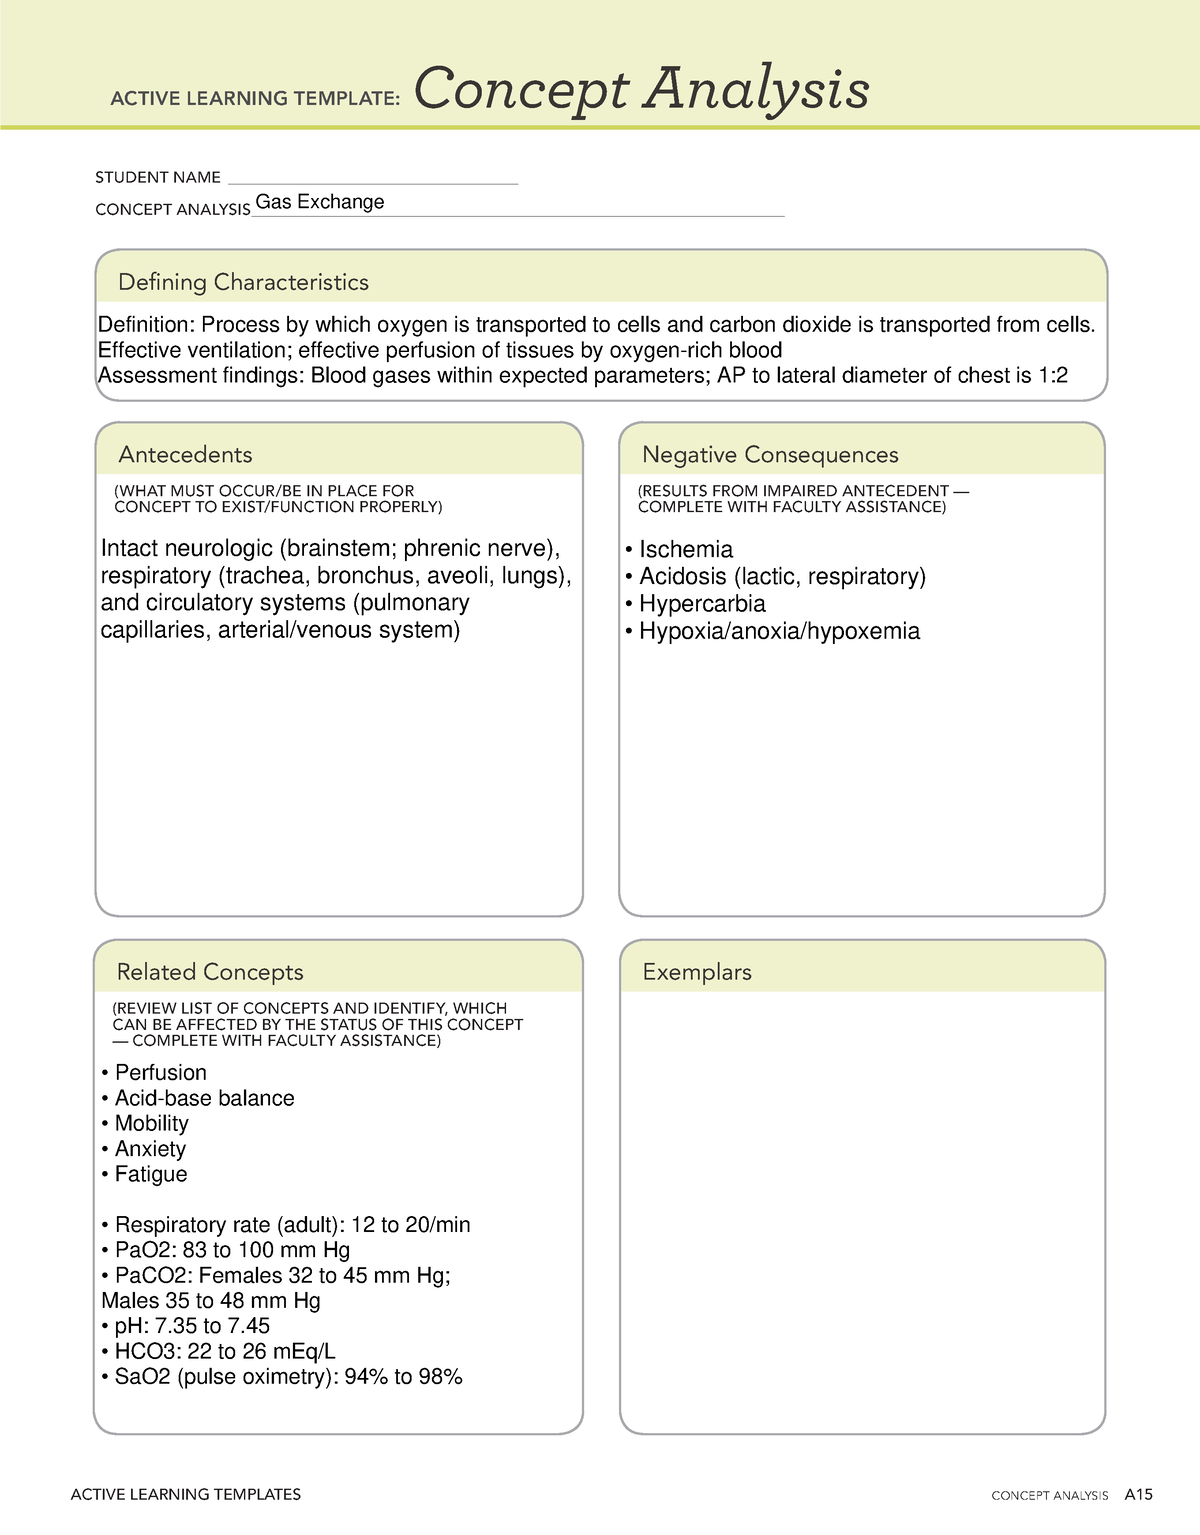 ati-active-learning-template-concept-analysis-sample-active-learning